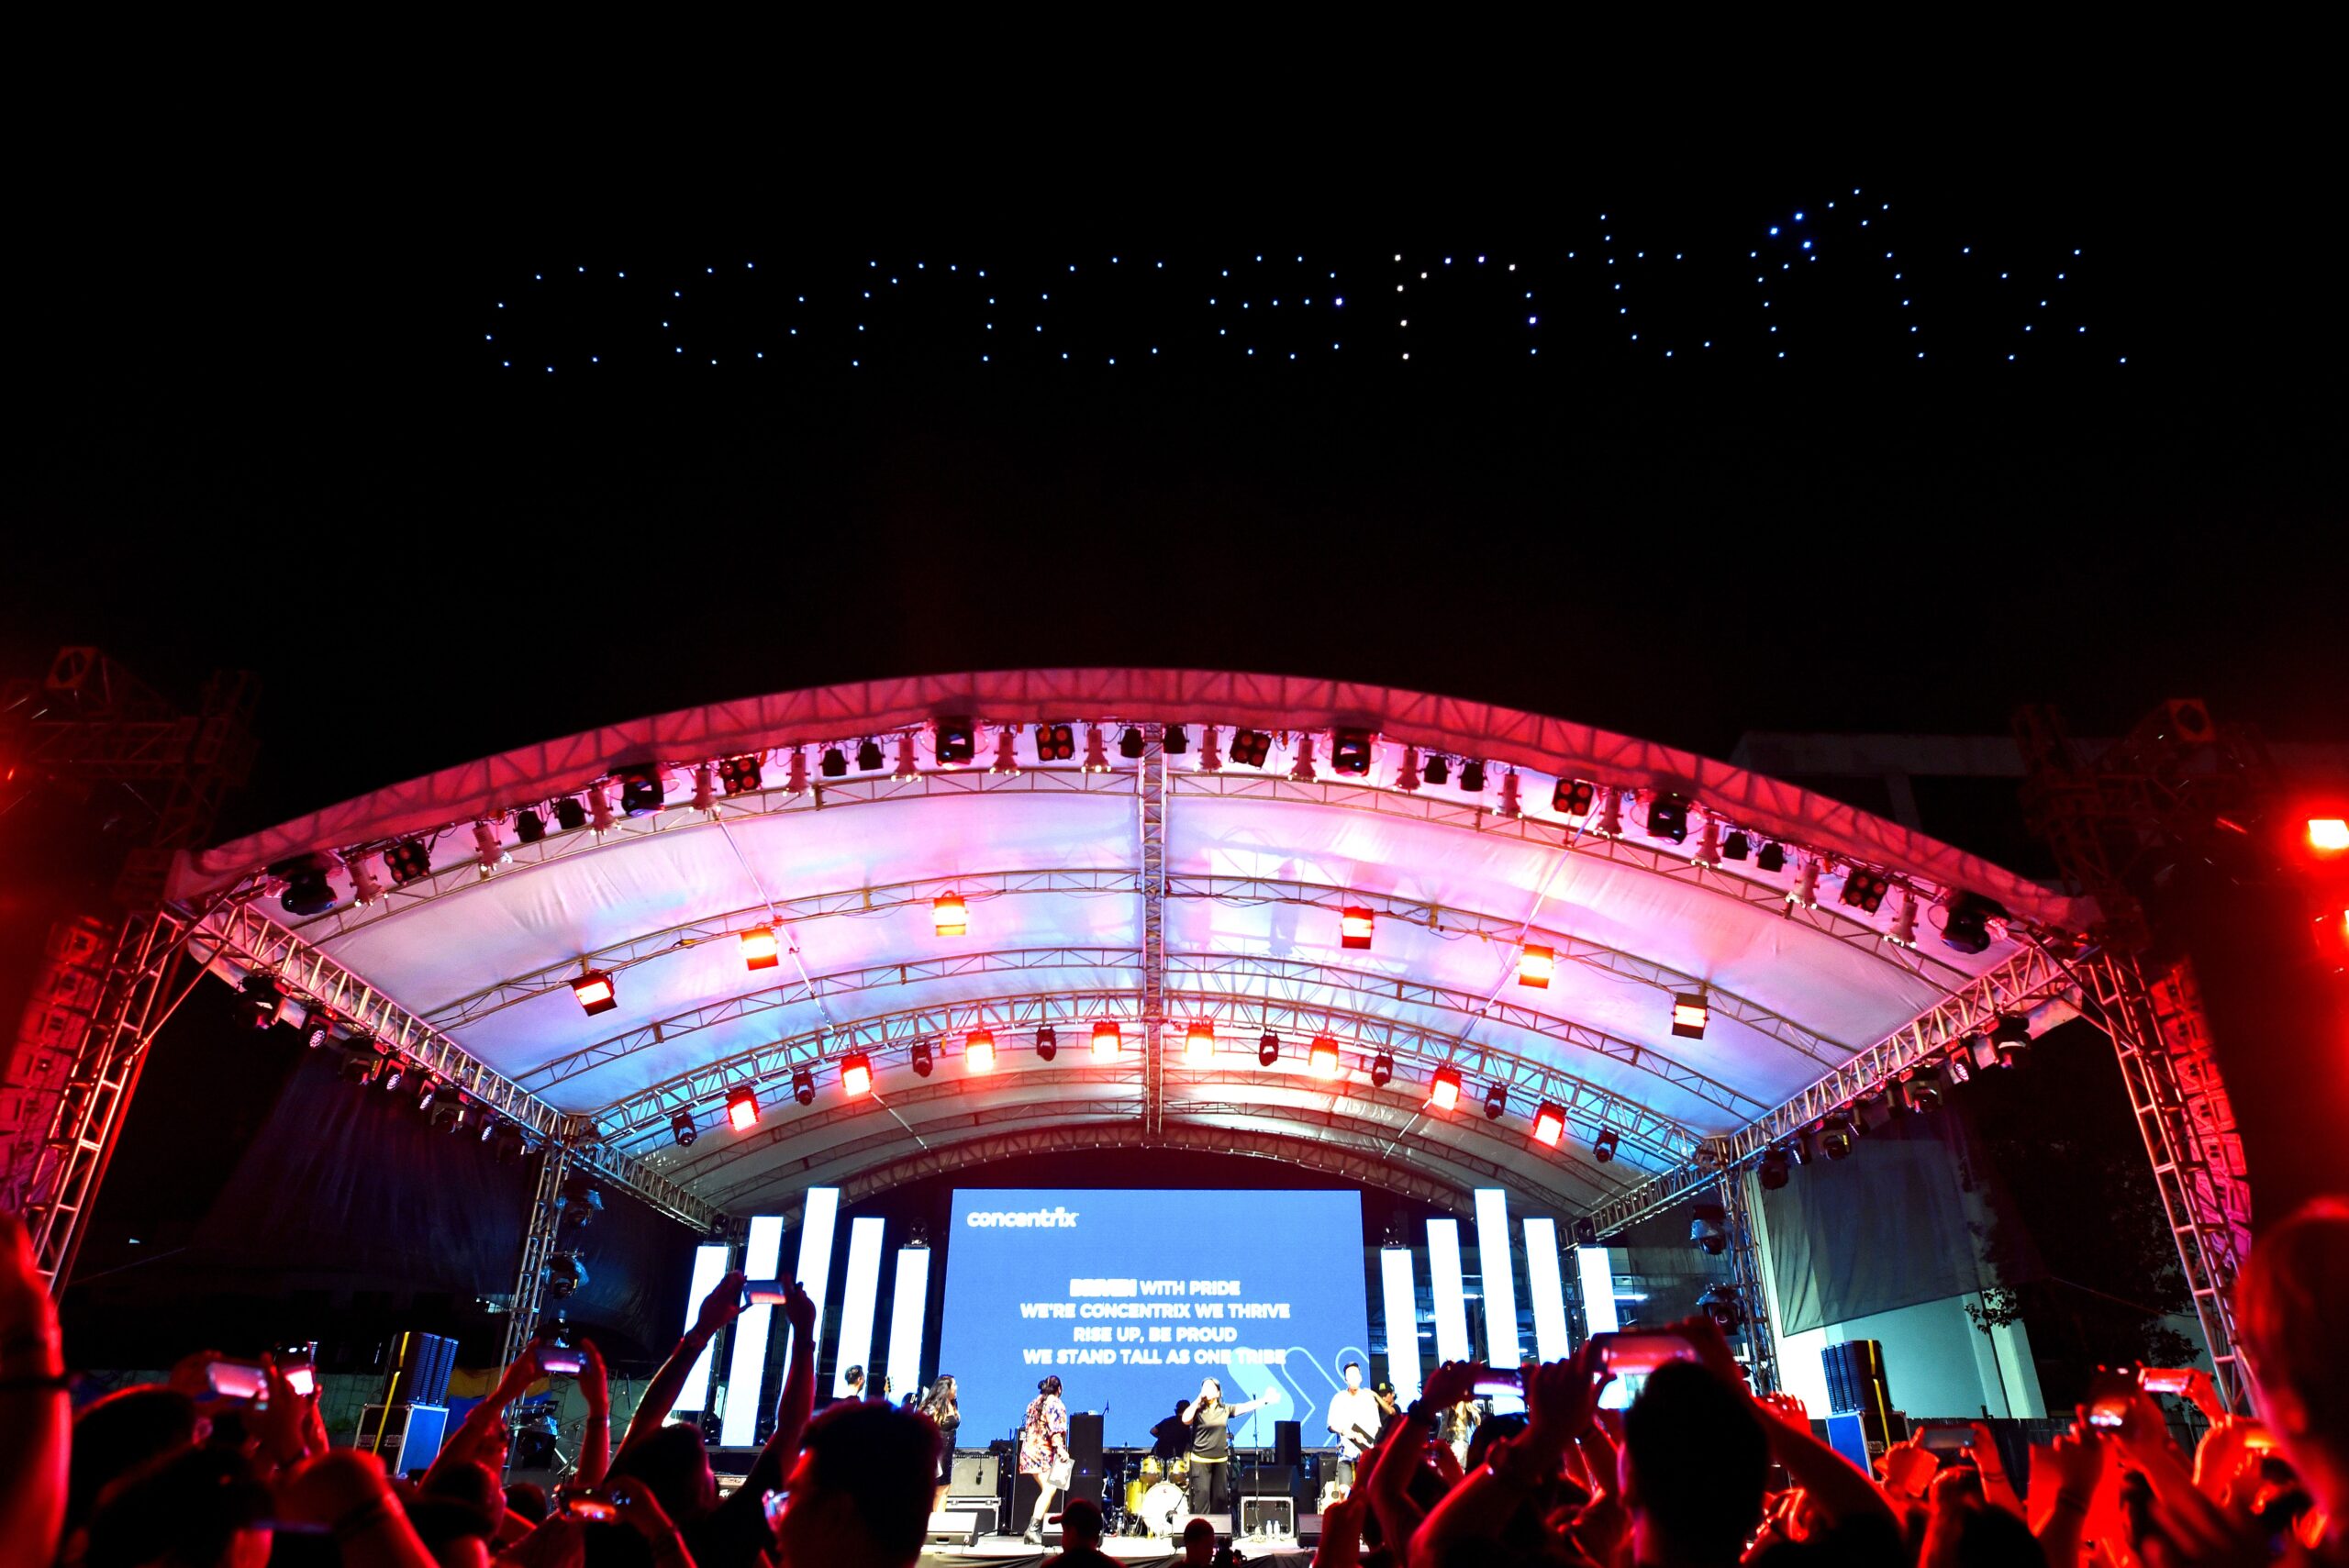 Concentrix Unveils New Brand in Drone Show at Family Day Concert